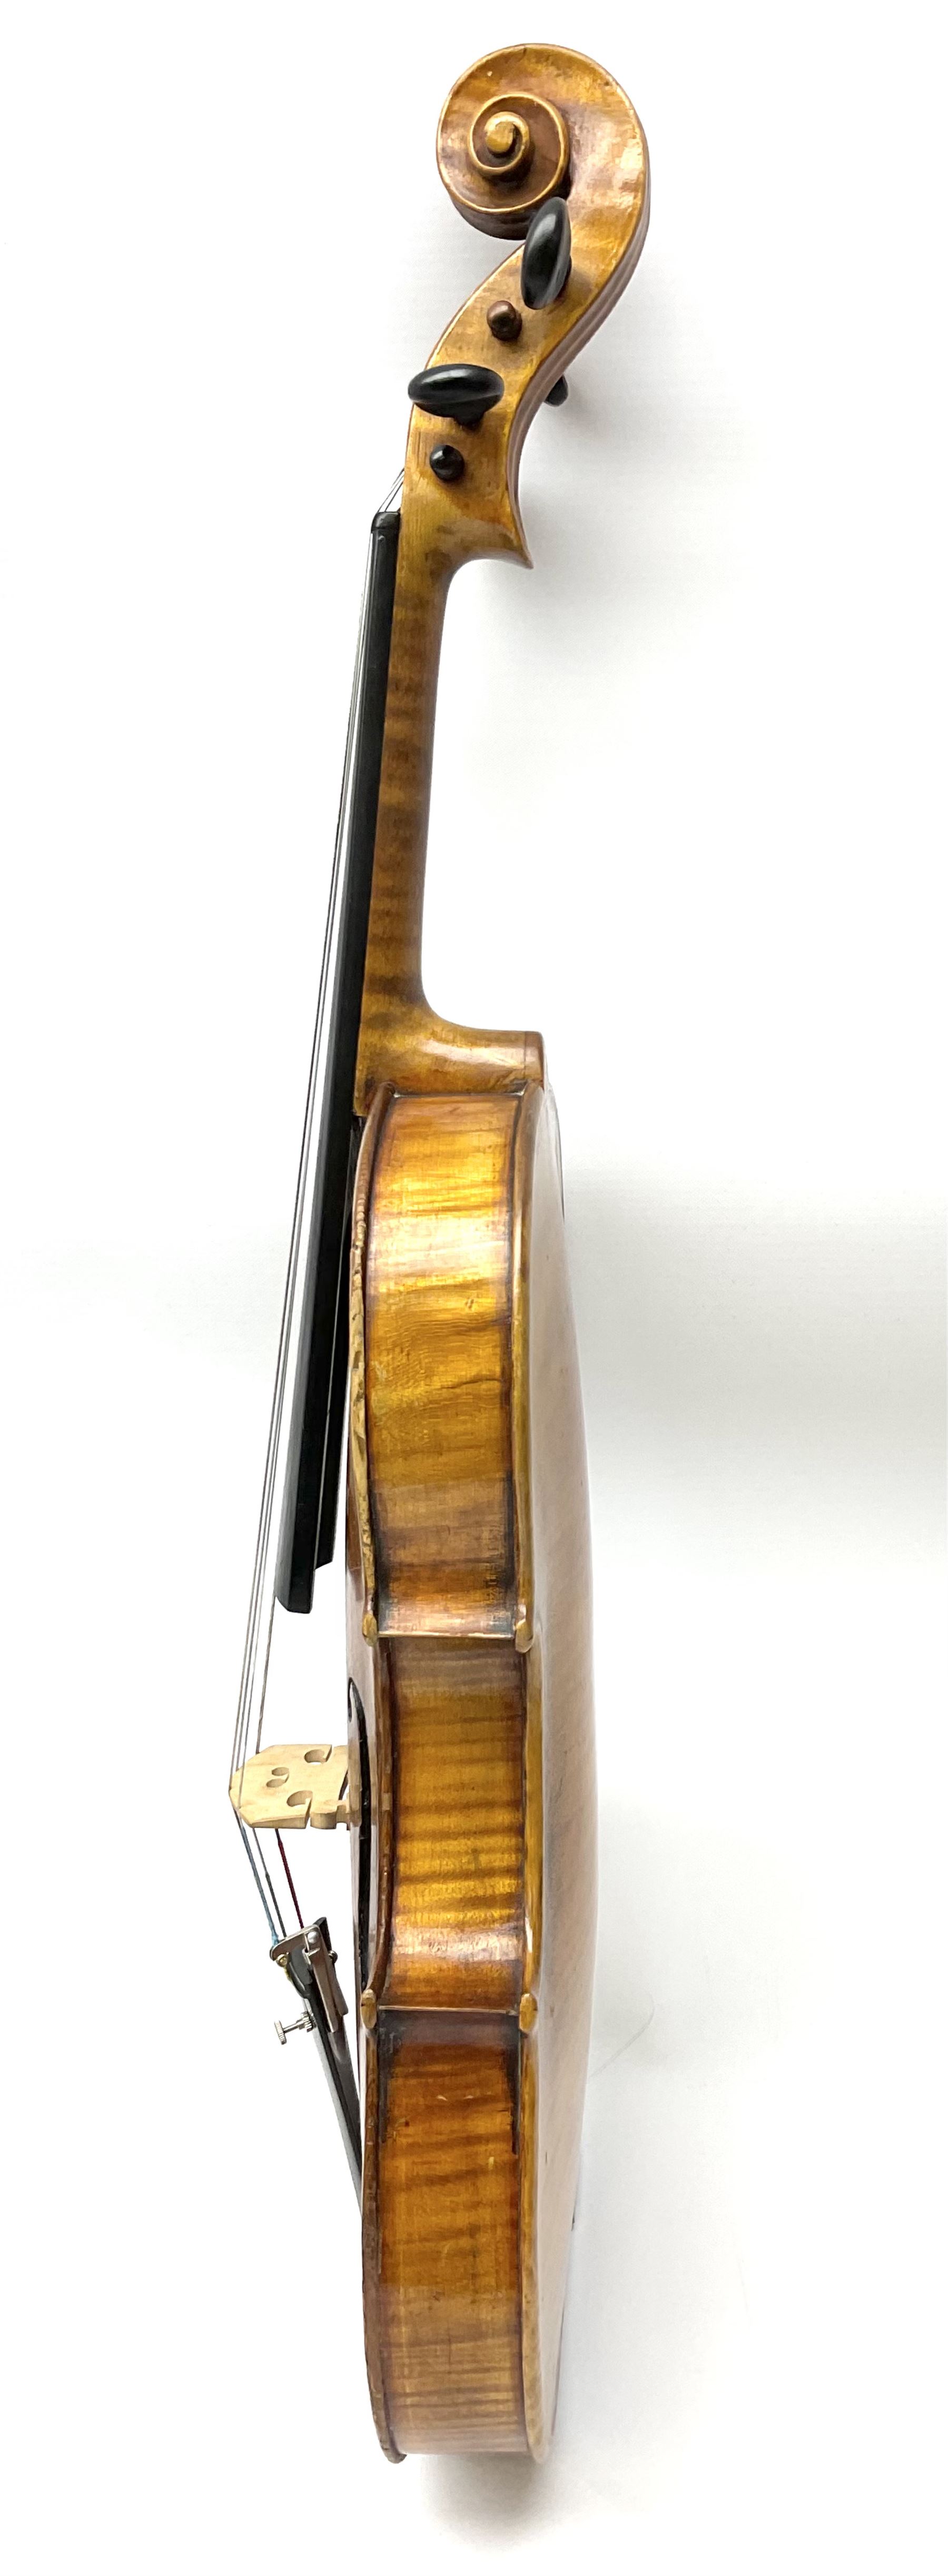 German viola c1900 with 38.5cm (15.25") two-piece maple back and ribs and spruce top - Image 9 of 21